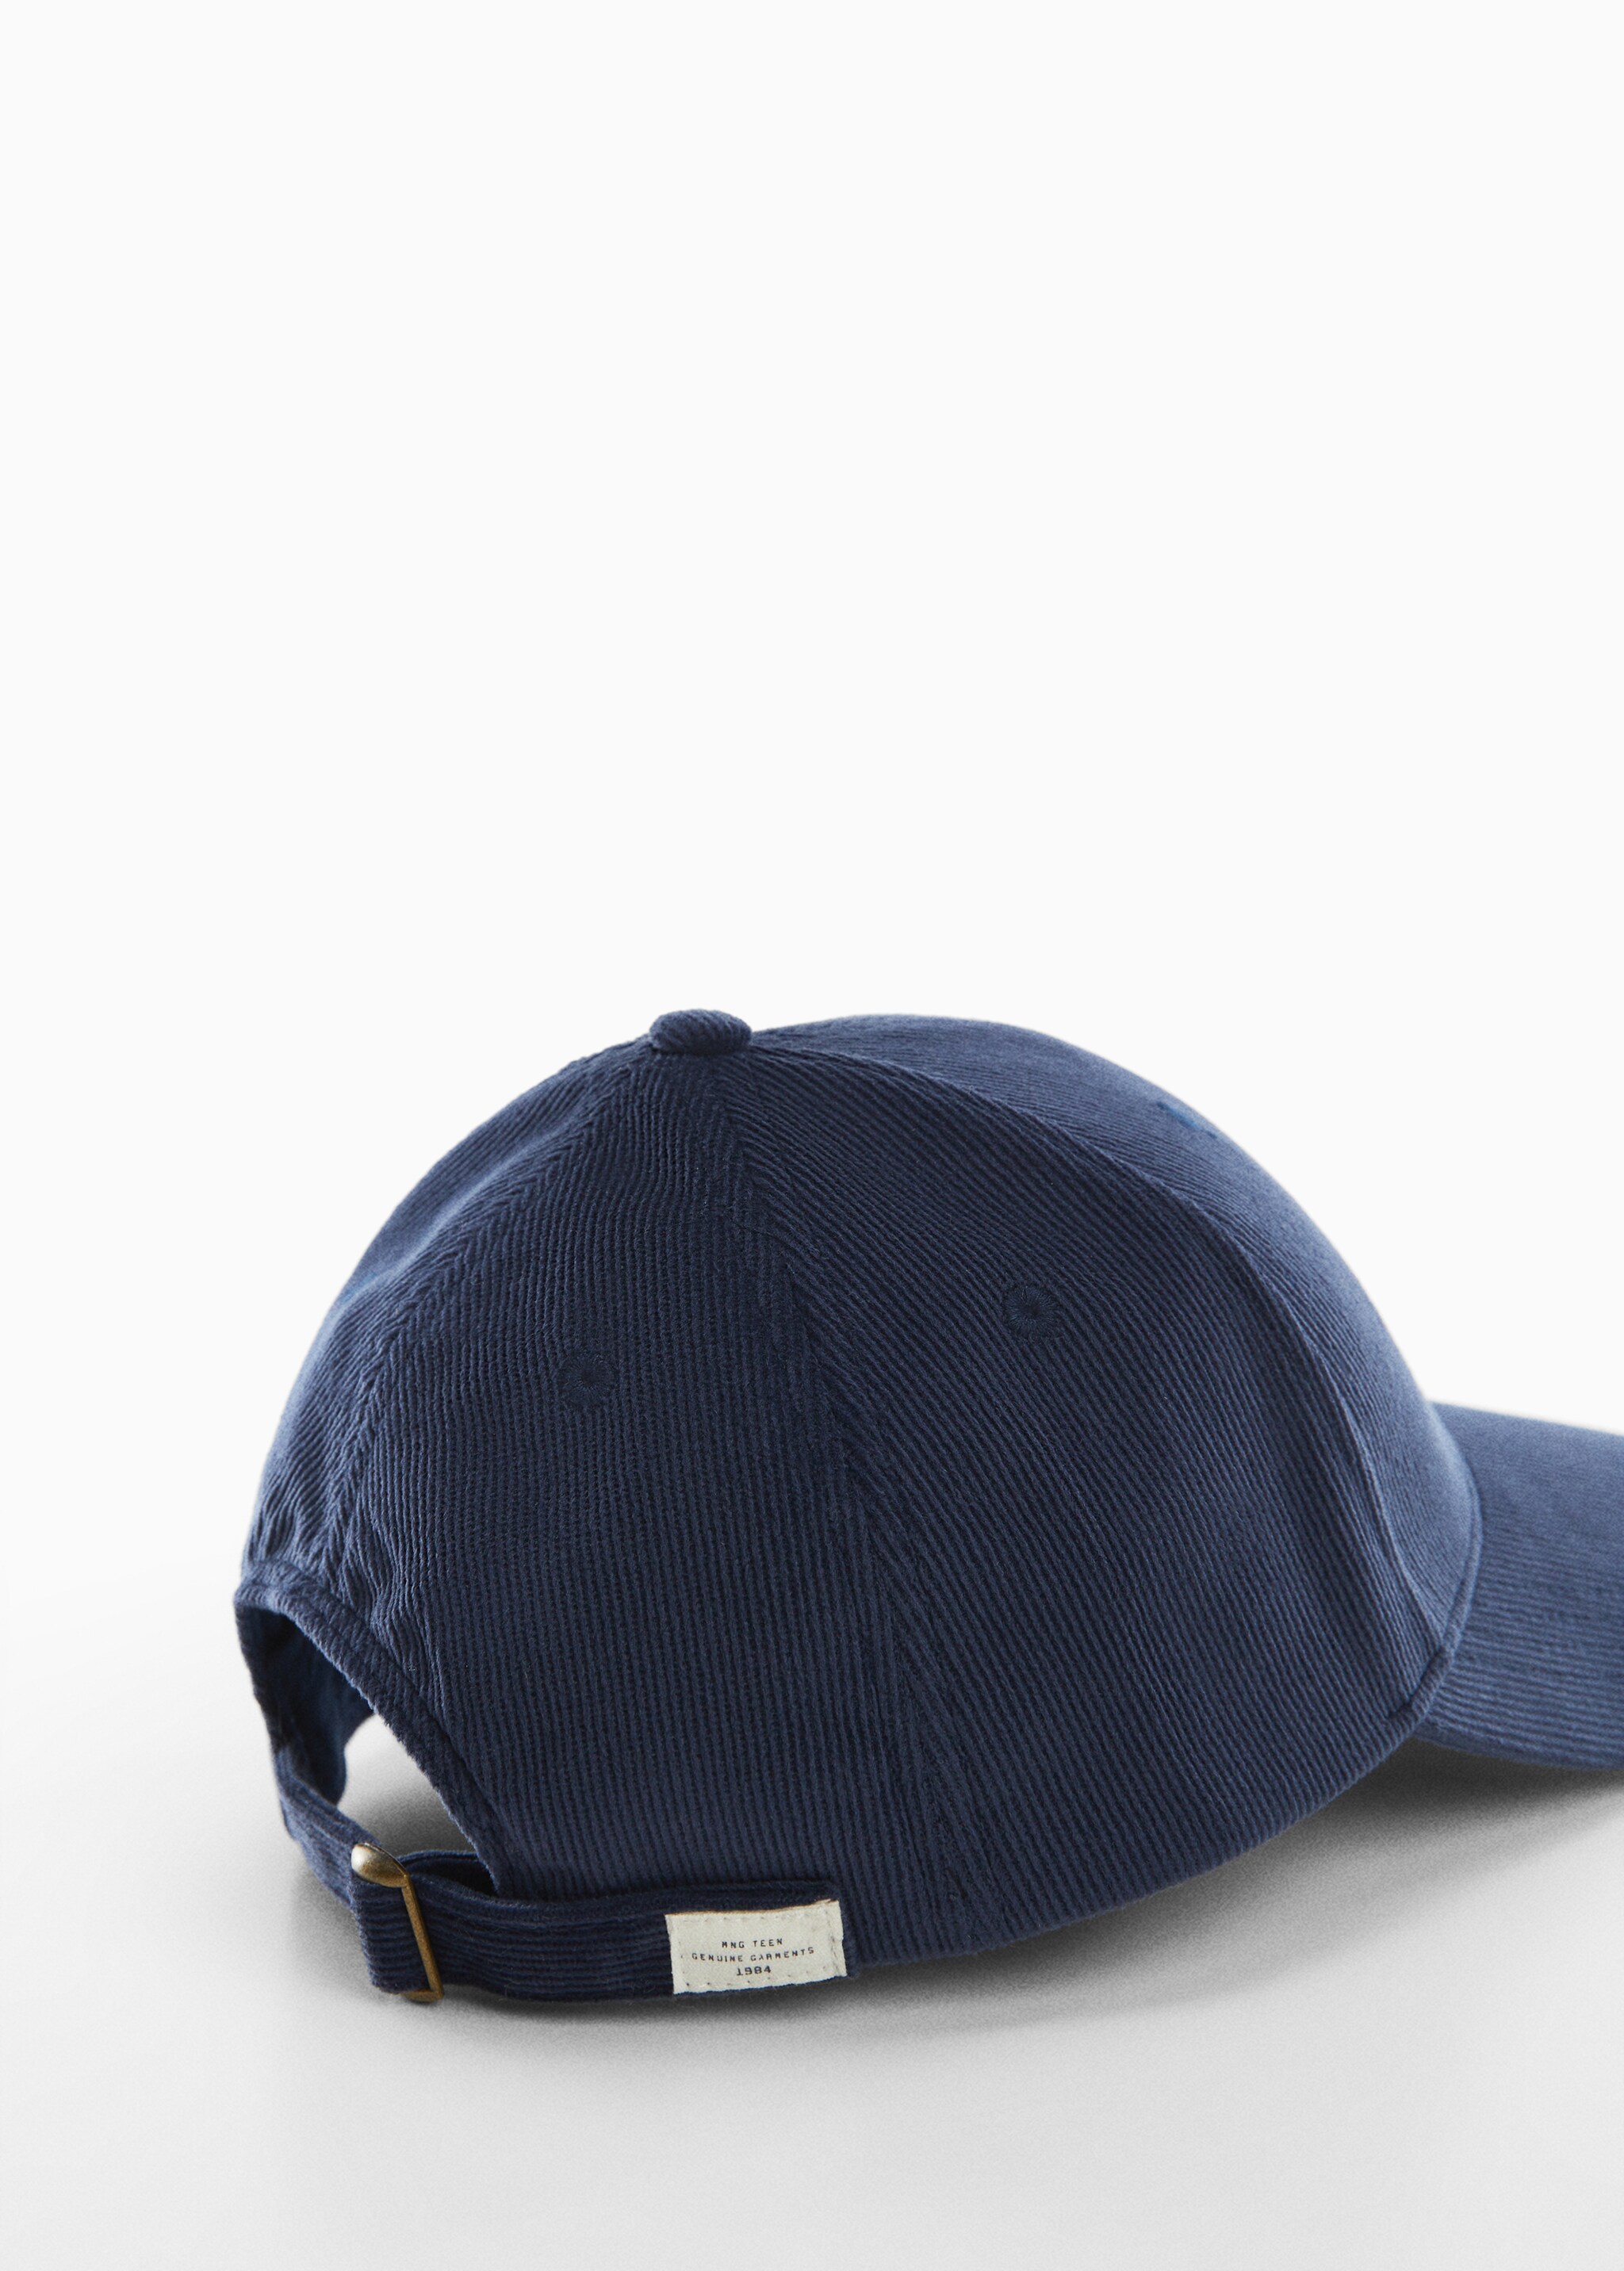 Embroidered message cap - Details of the article 2